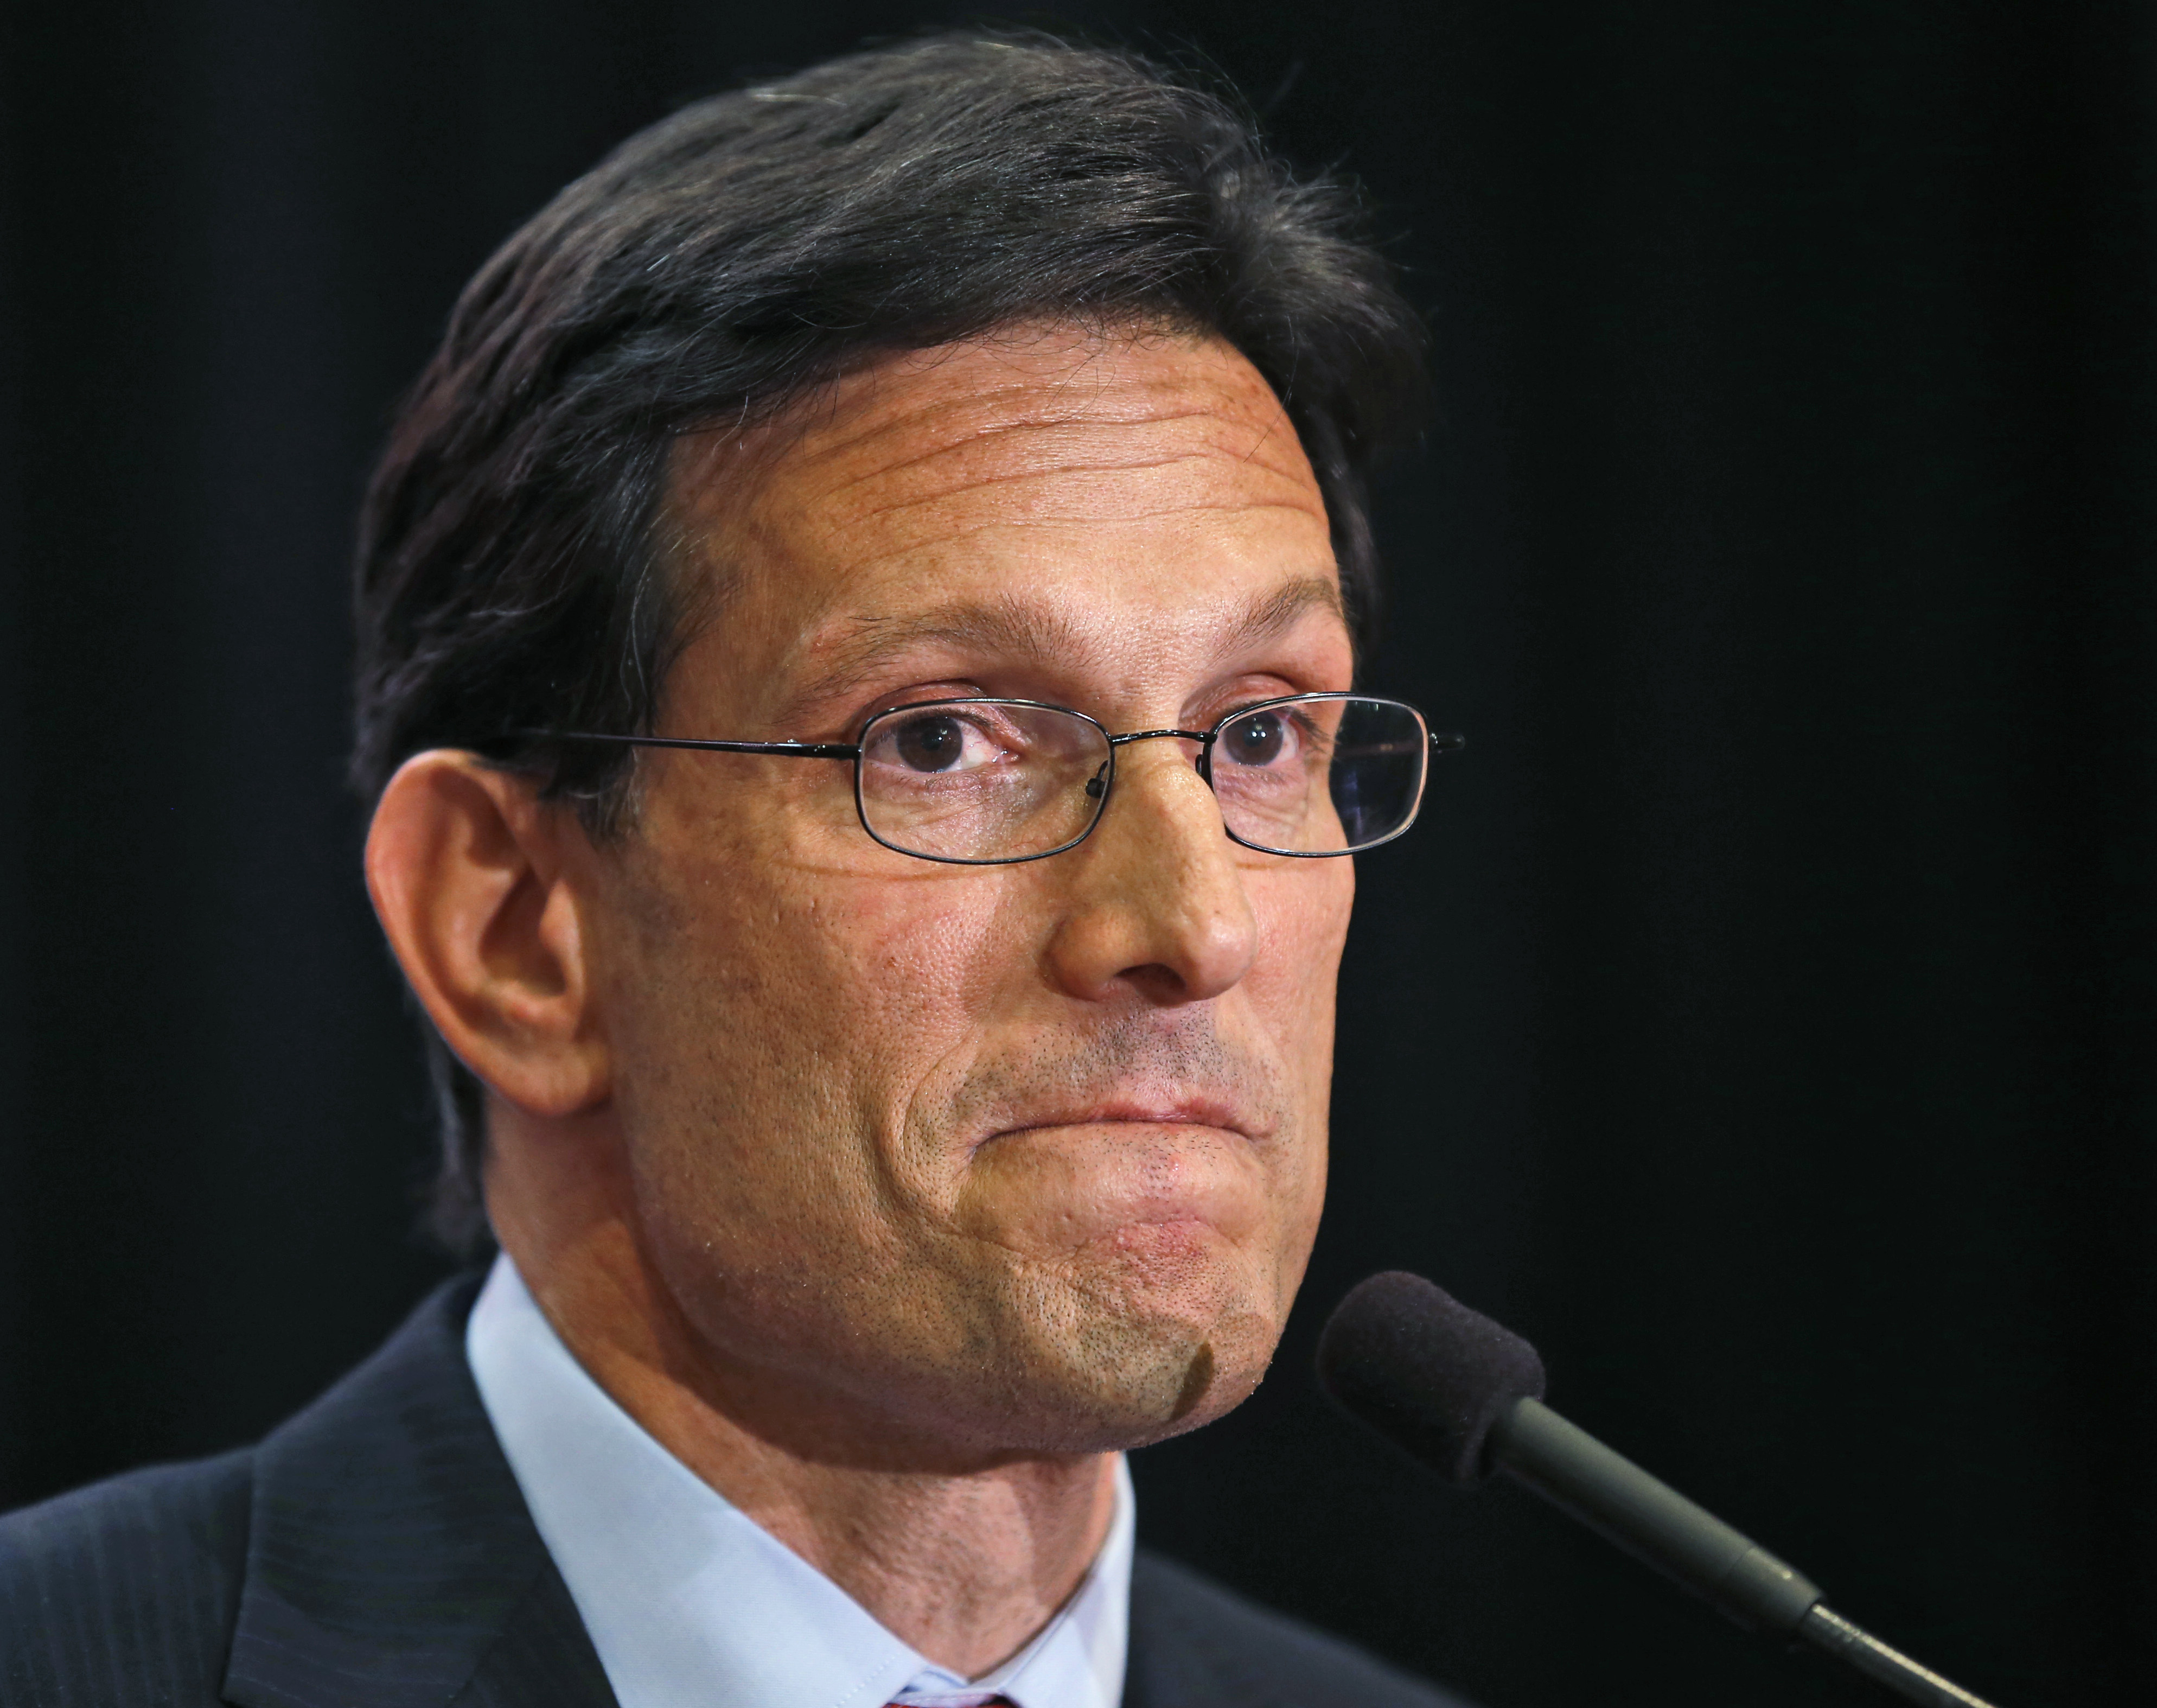 Eric Cantor delivers a speech in Richmond, Va. on June 10, 2014. (Steve Helber—AP)